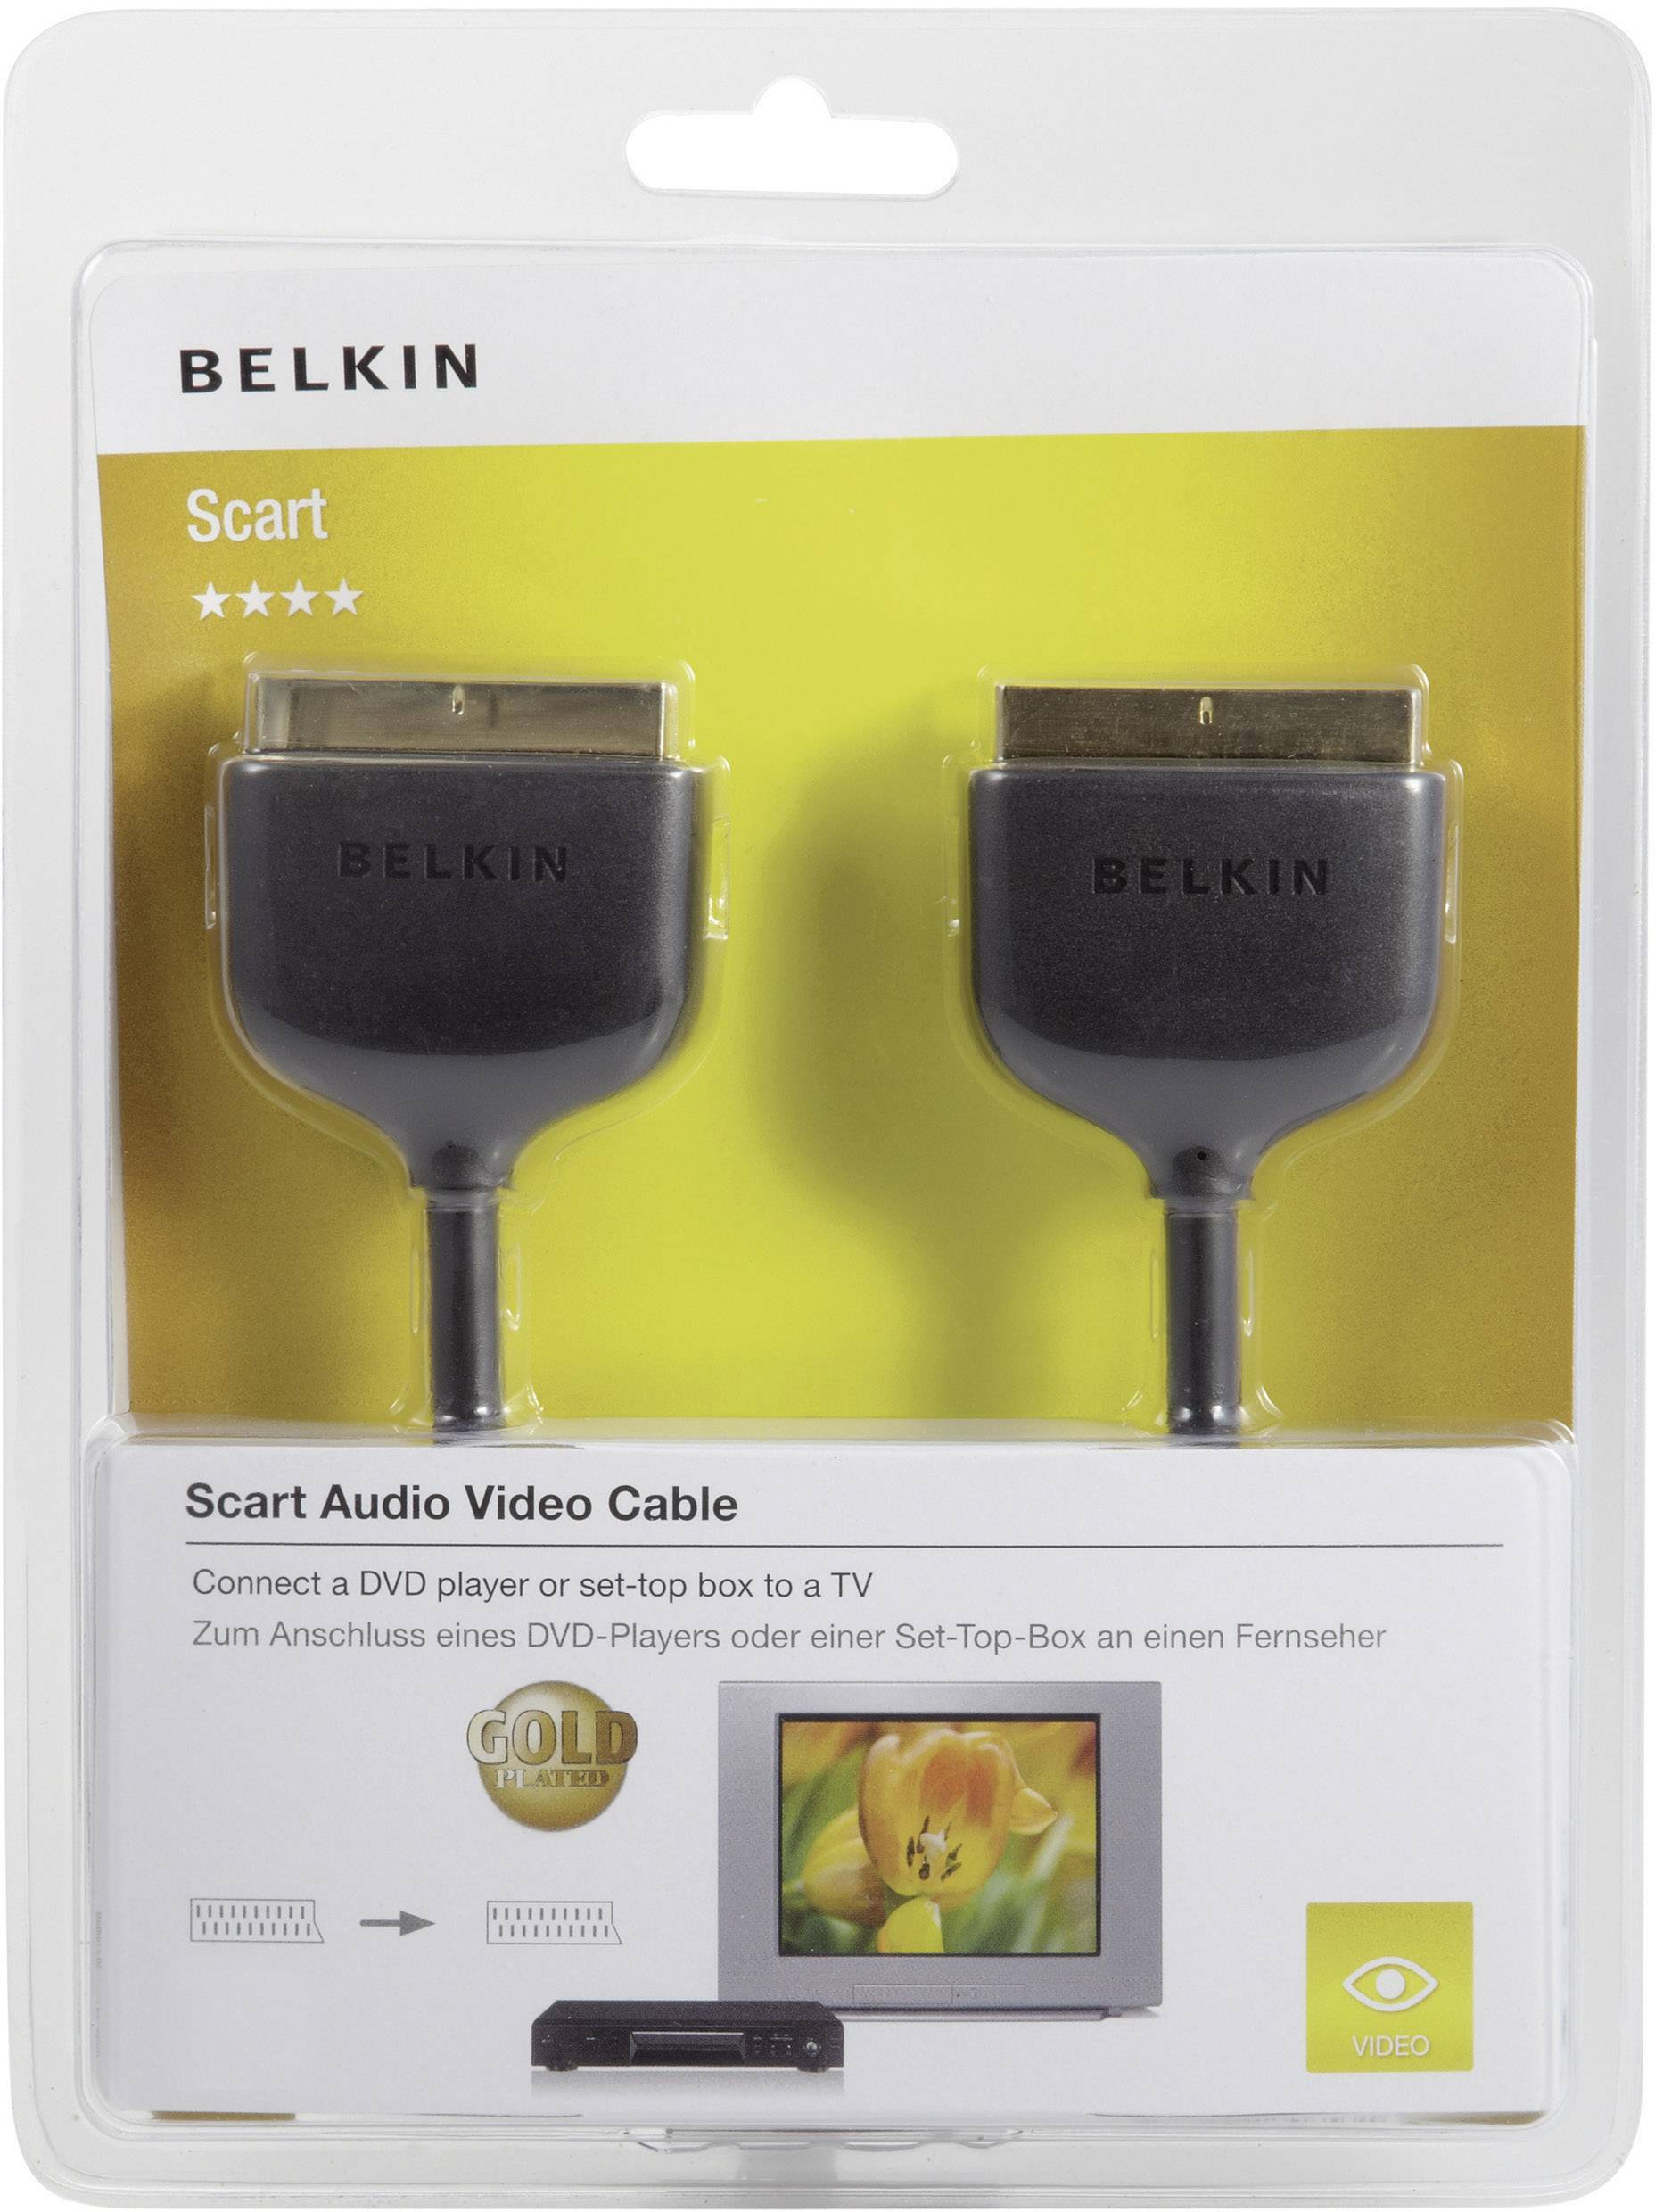 Belkin Belkin Scart Audio Video Cable 5m For TV DVD Set Top Box high Quality Genuine 